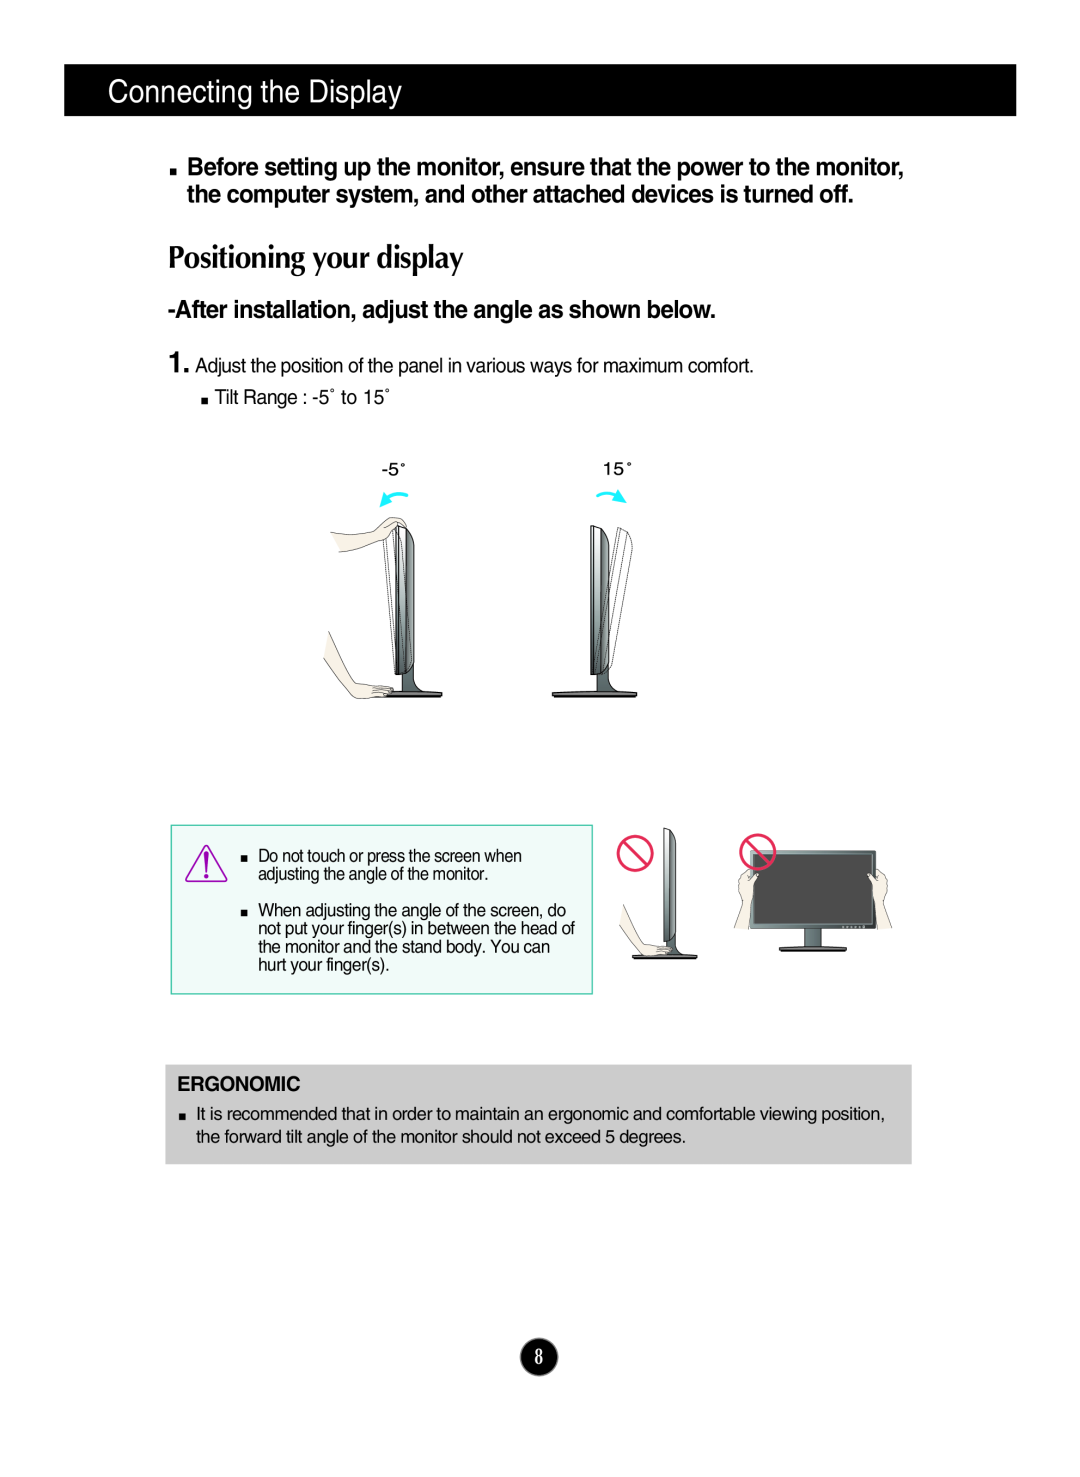 LG Electronics W2046T Positioning your display, After installation, adjust the angle as shown below, Tilt Range -5˚ to 15˚ 